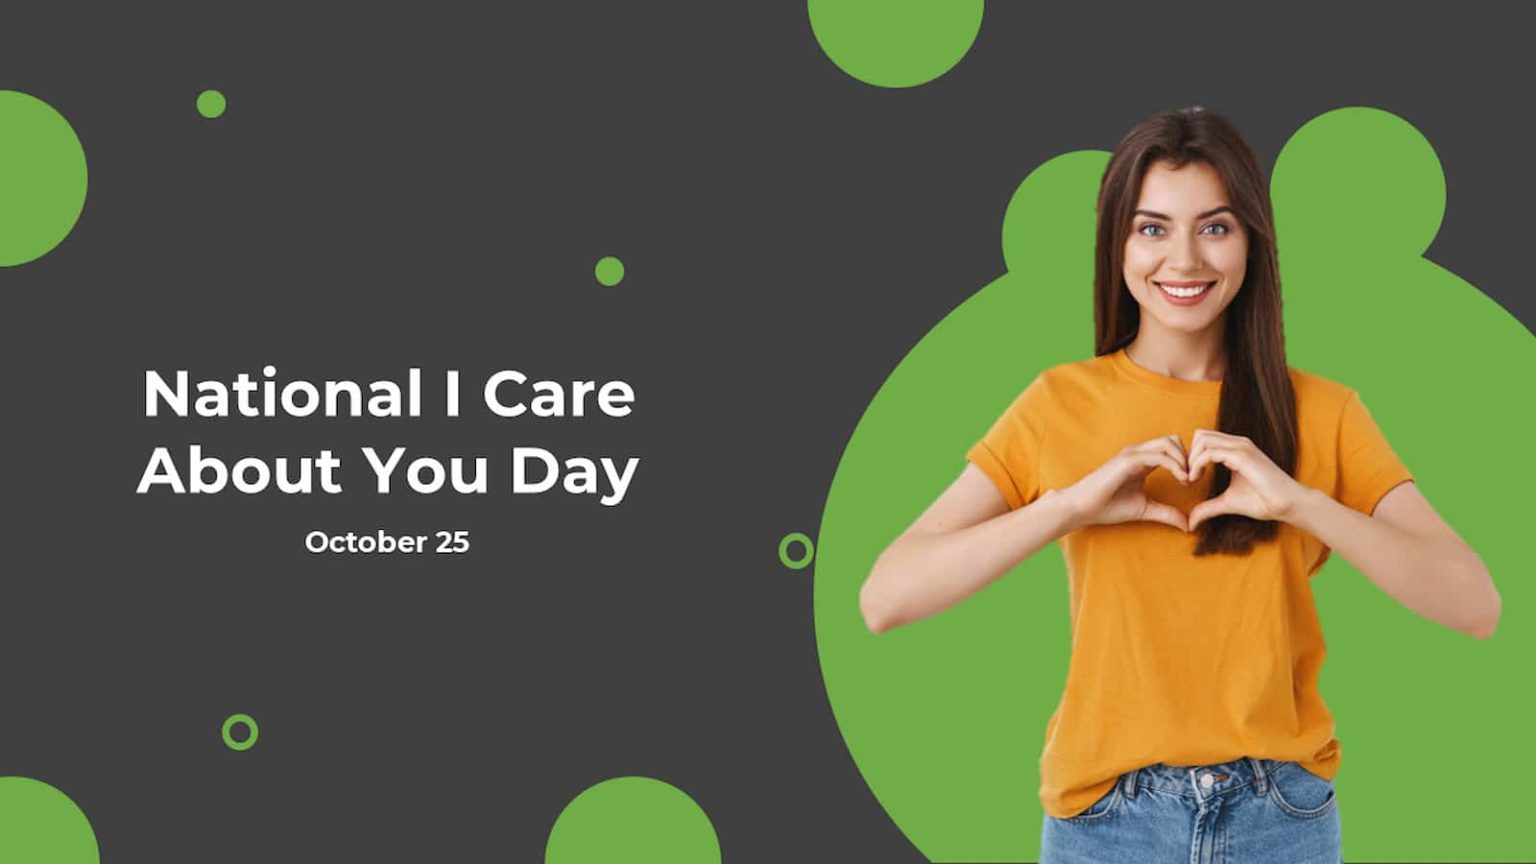 National I Care About You Day Quotes, Wishes And Messages